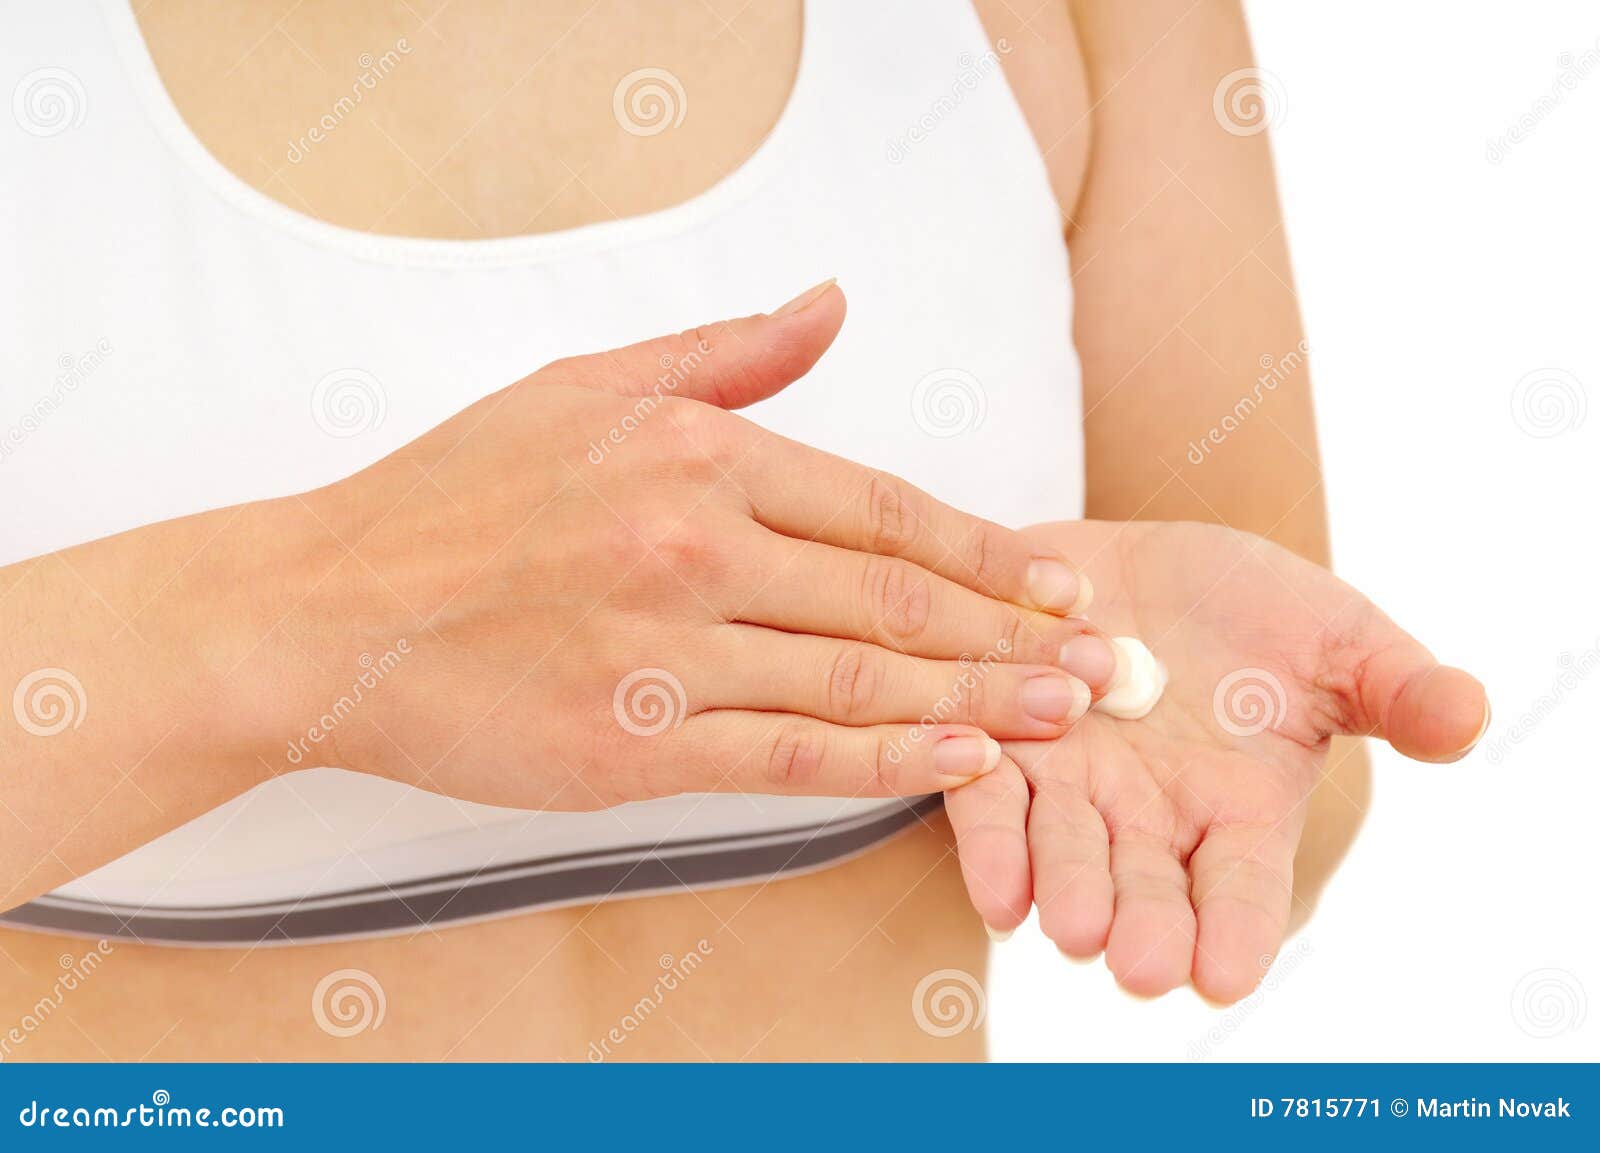 Treatment Of Dry Hands Skin With Cream Stock Image - Image  